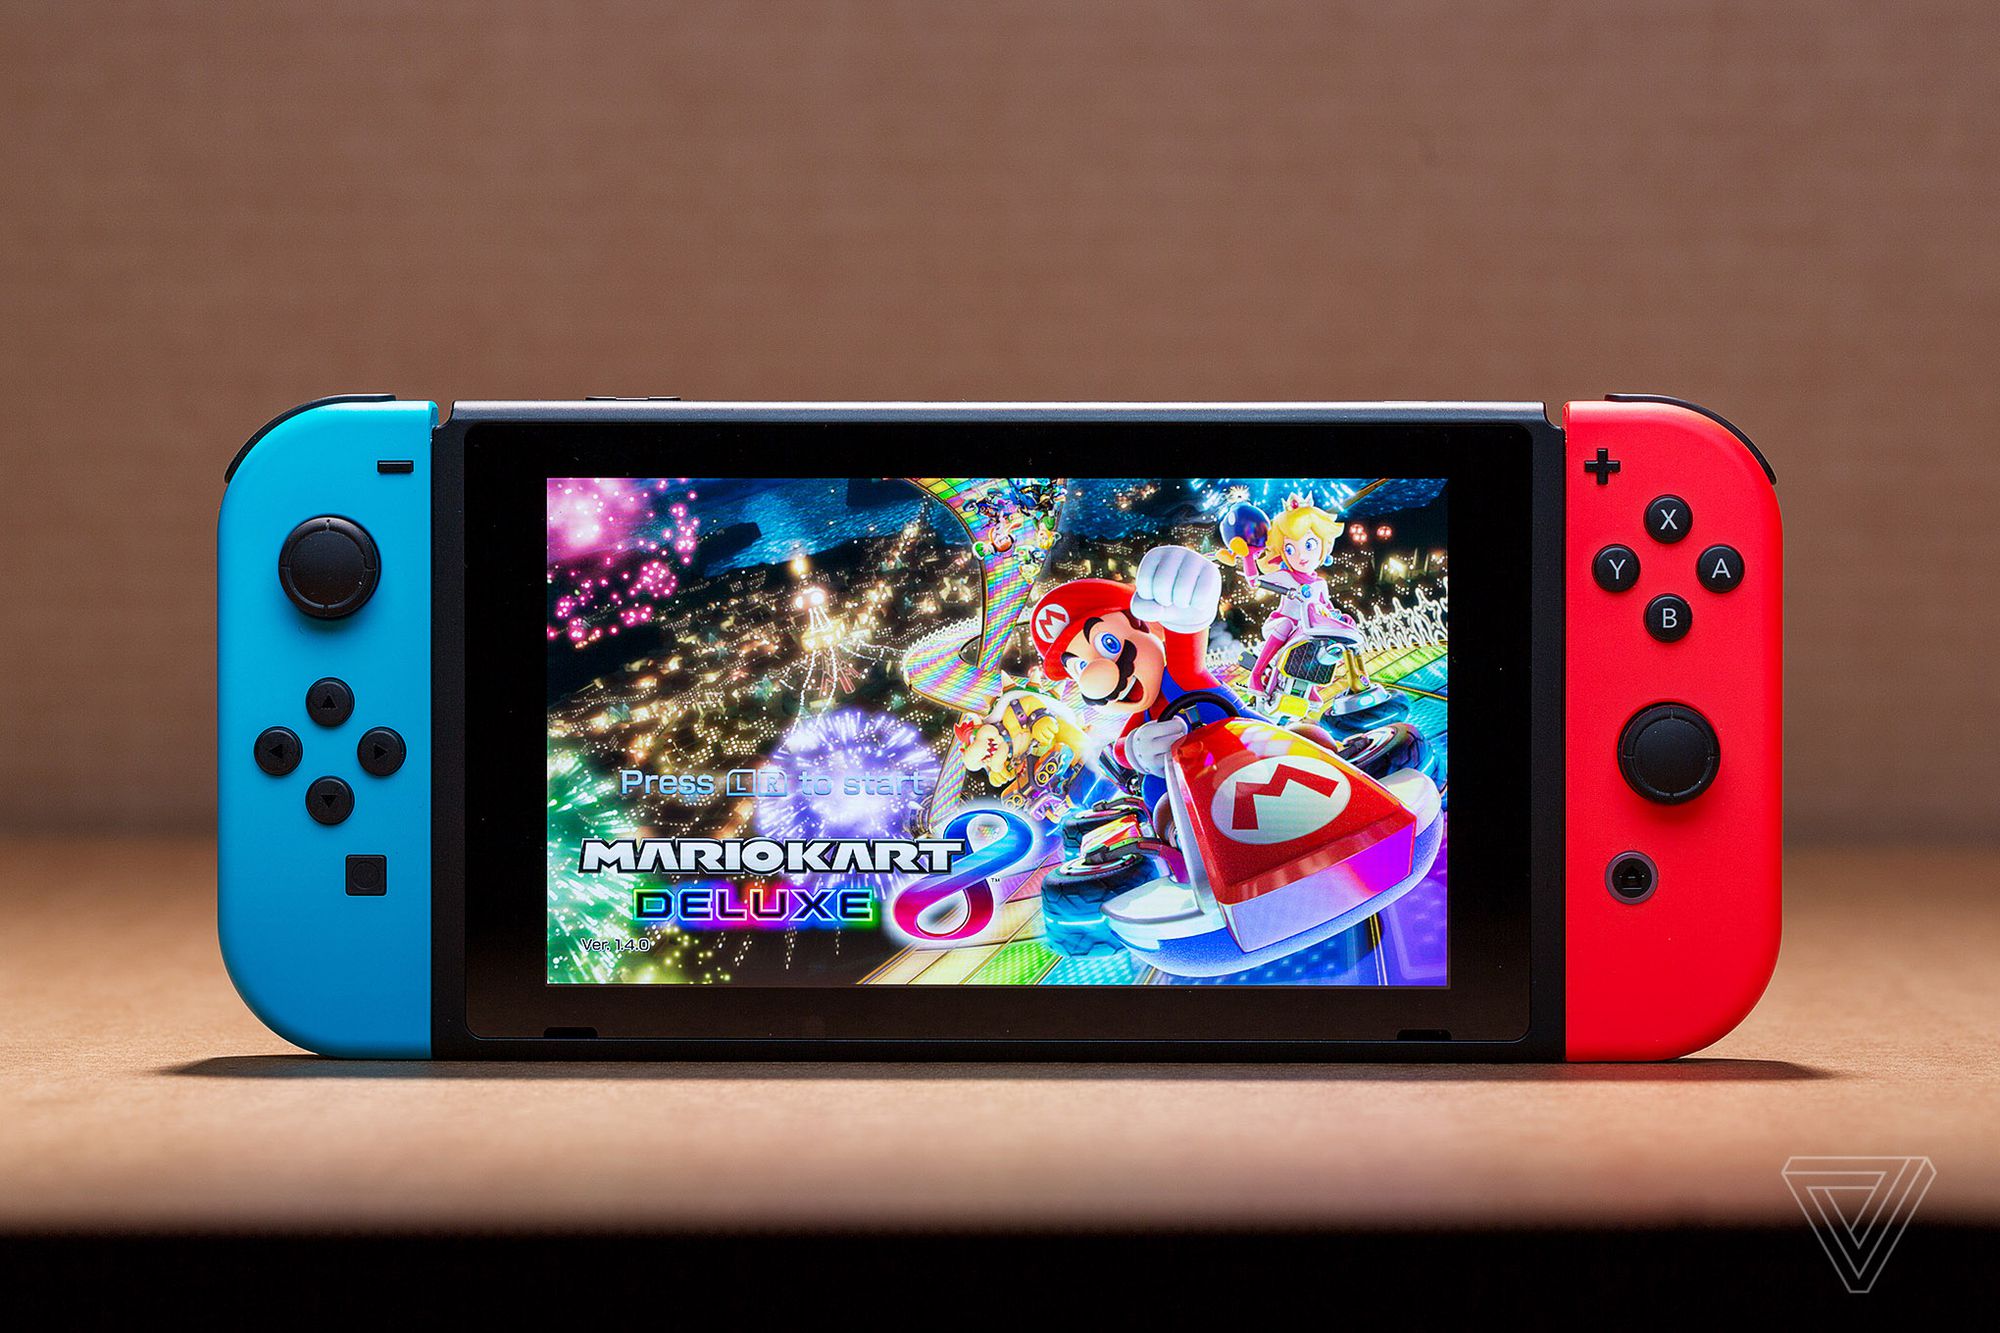 Nintendo's Switch with better battery life includes Mario Kart 8 Deluxe for Black - The